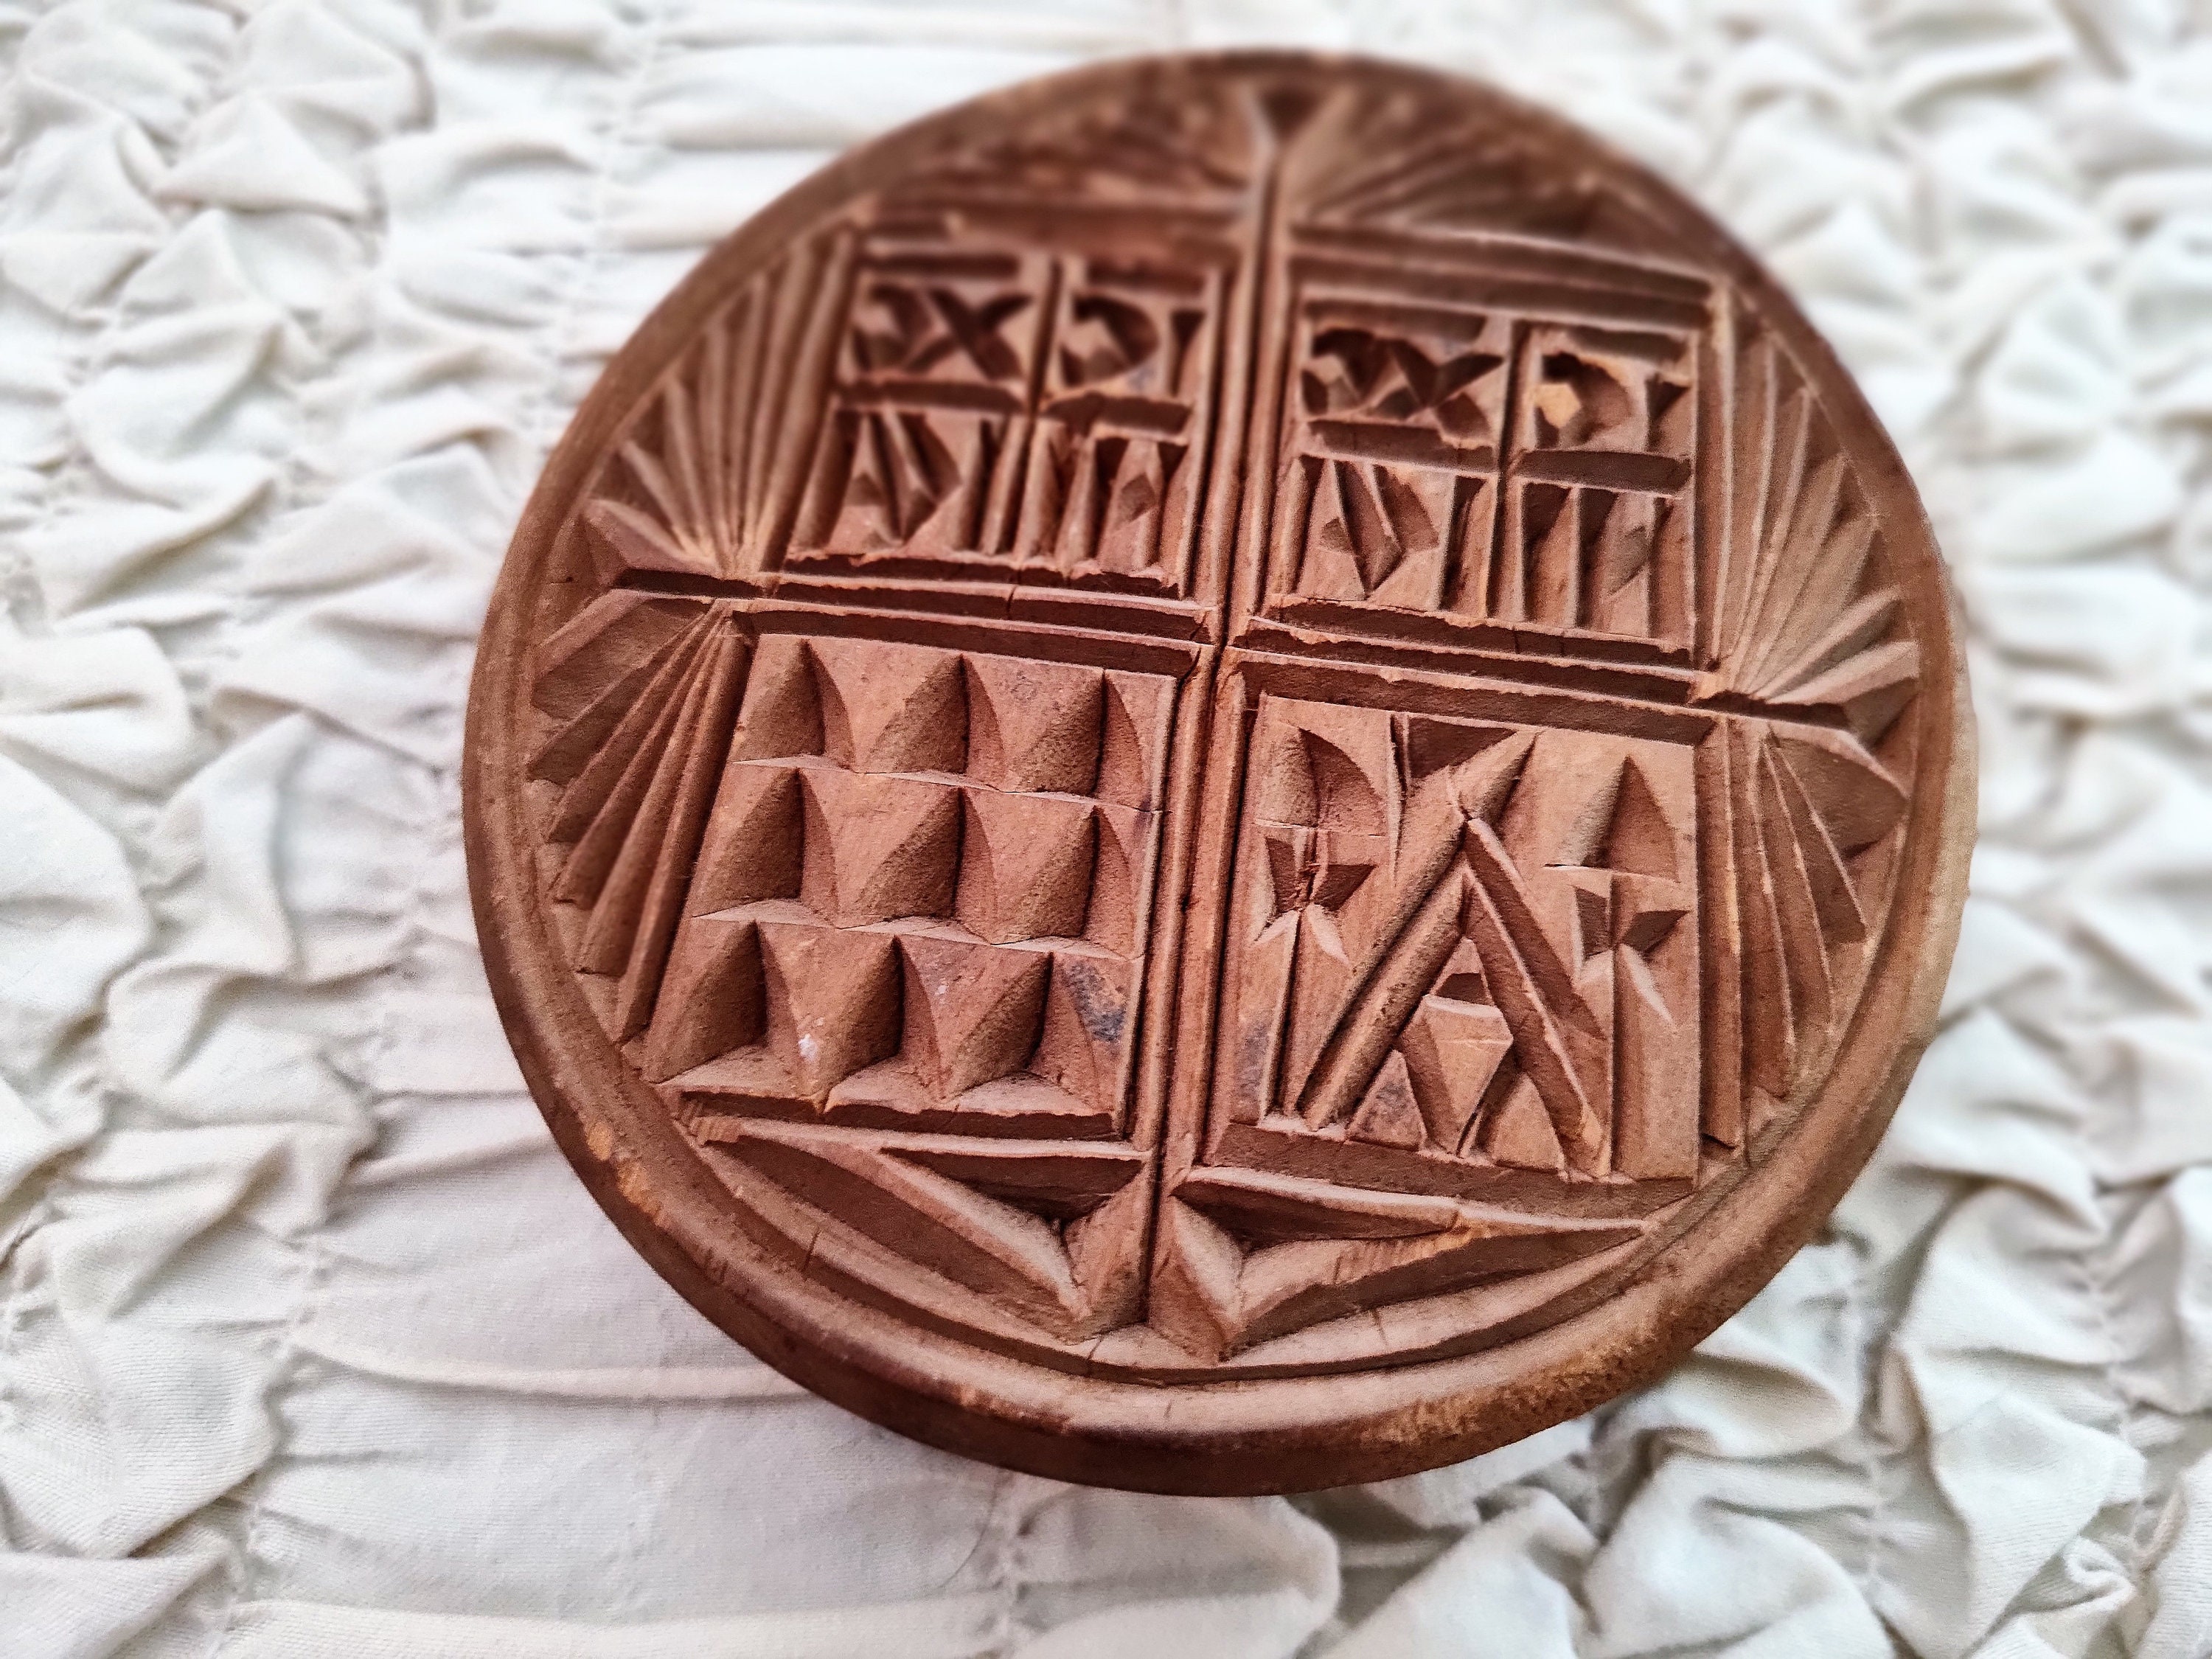 Handcrafted Wooden Catholic Symbol Cookie, Pastry, and Bread Stamp